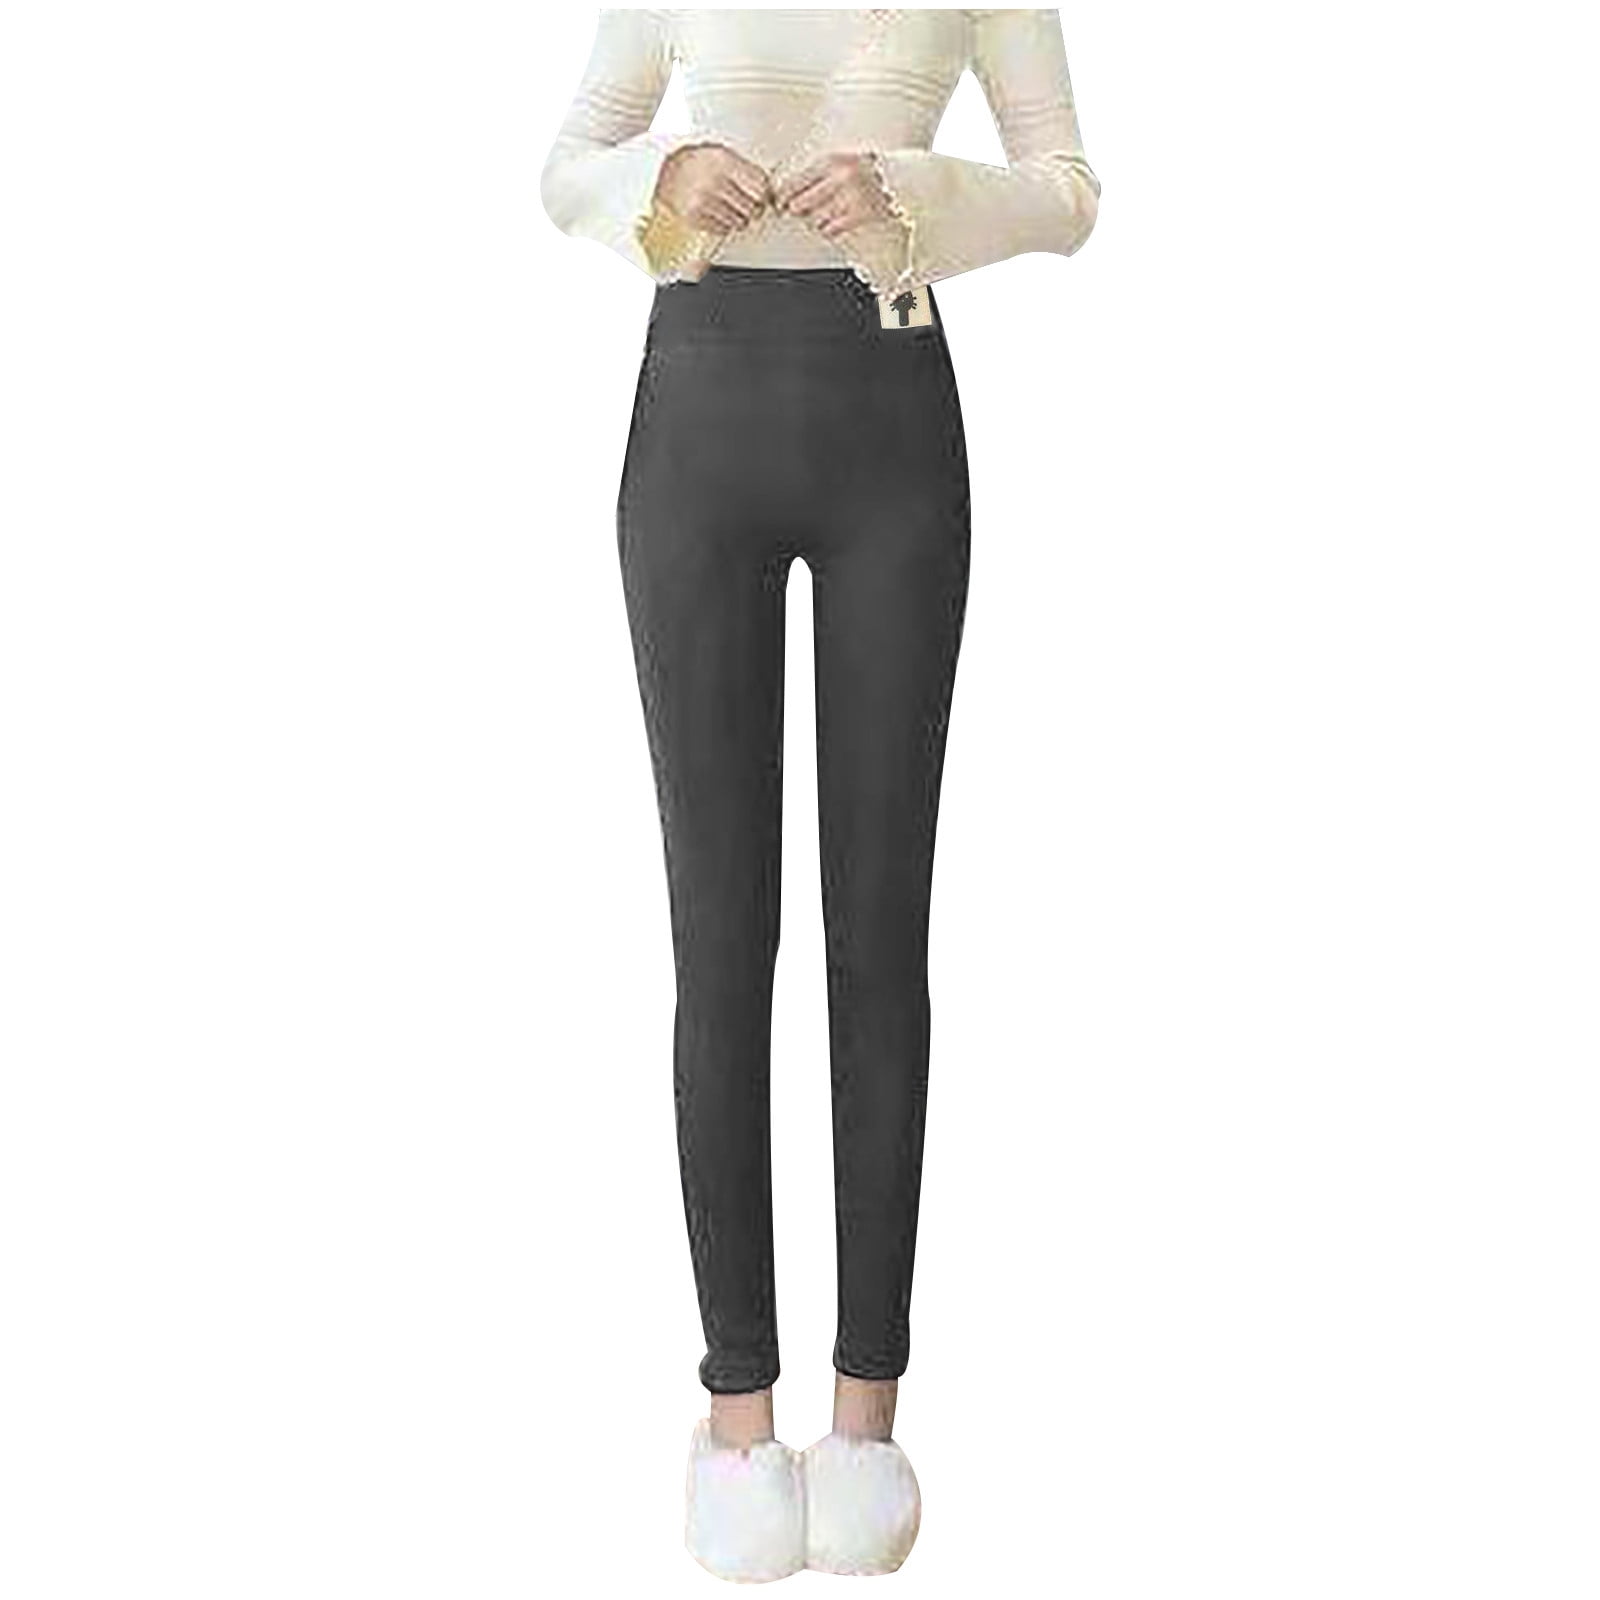 1pc Thickened And Fleece Lined Women's Winter Leggings For Warmth